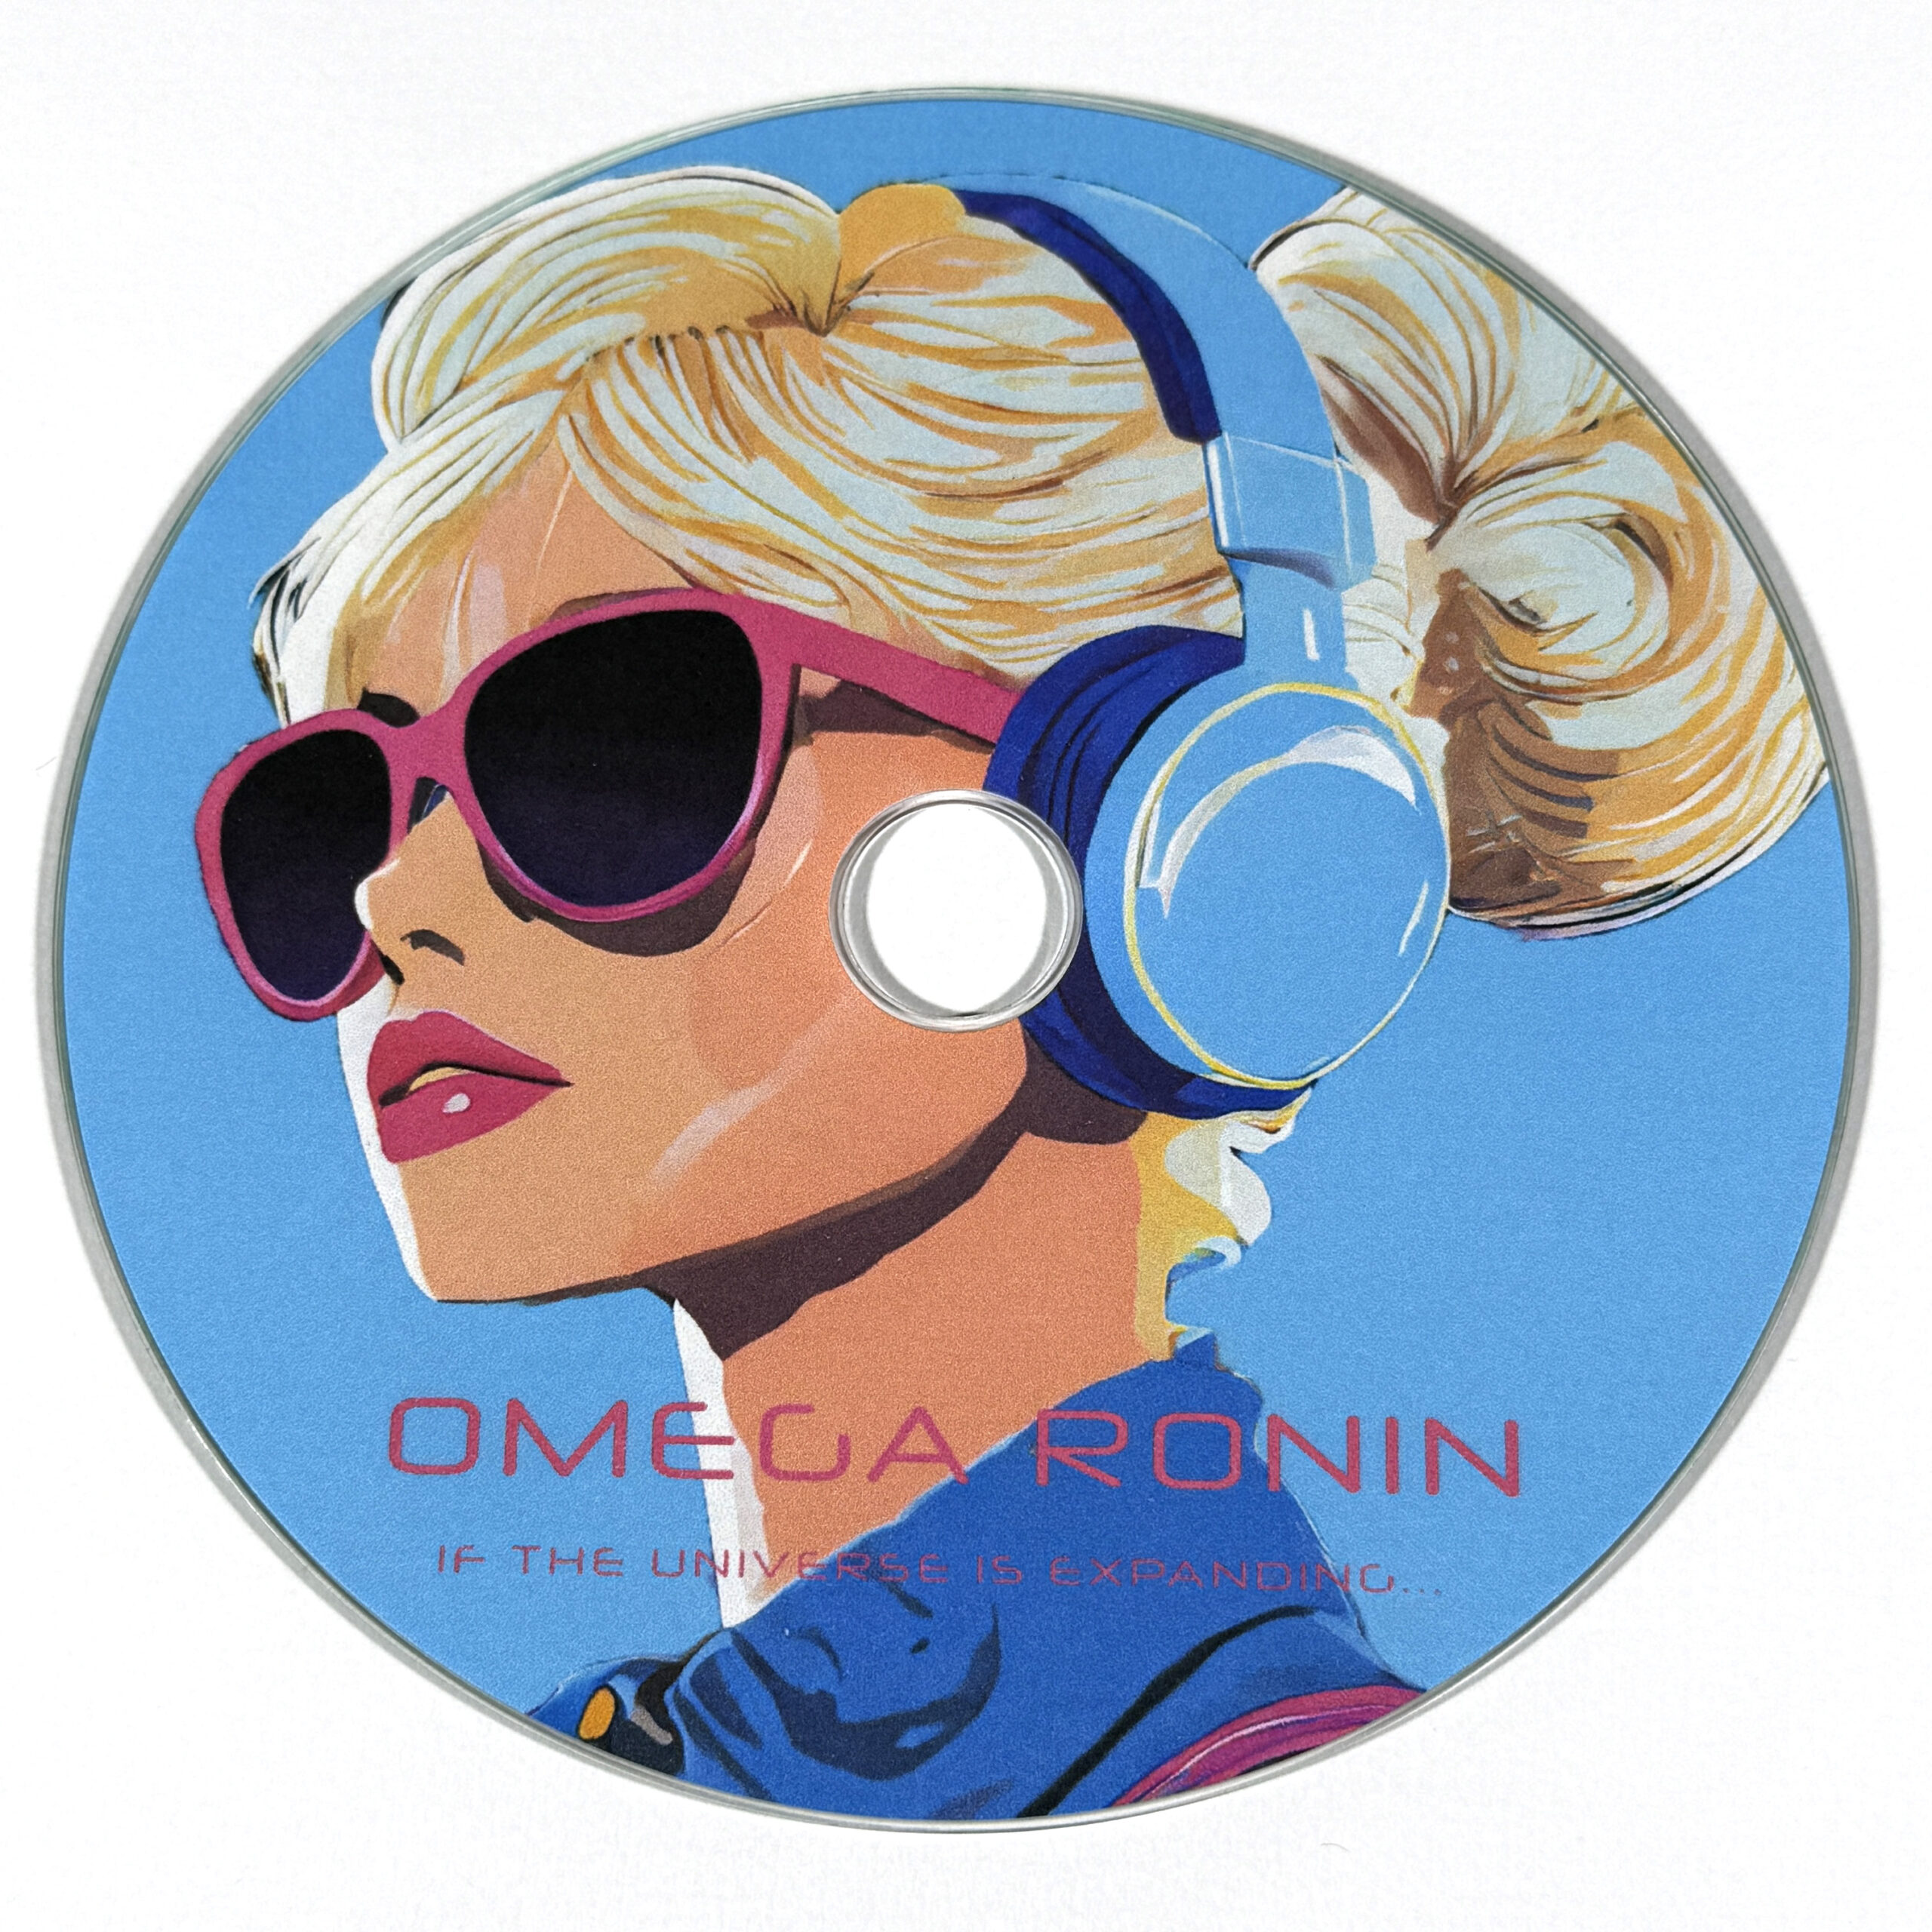 Omega Ronin: If the Universe is Expanding.... CD (Super Extended Cut)